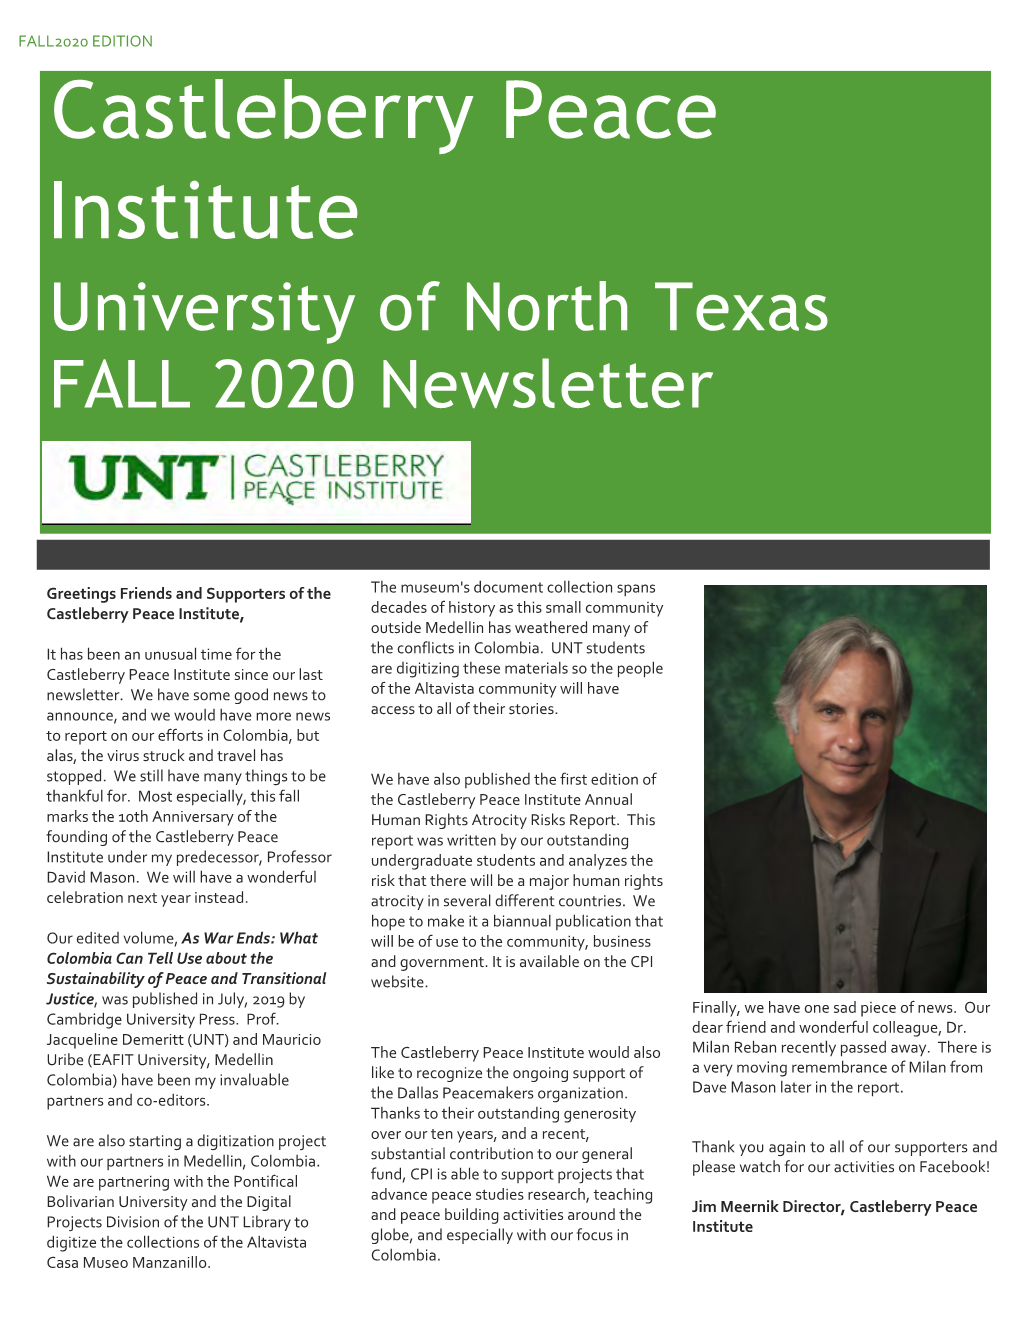 Castleberry Peace Institute University of North Texas FALL 2020 Newsletter